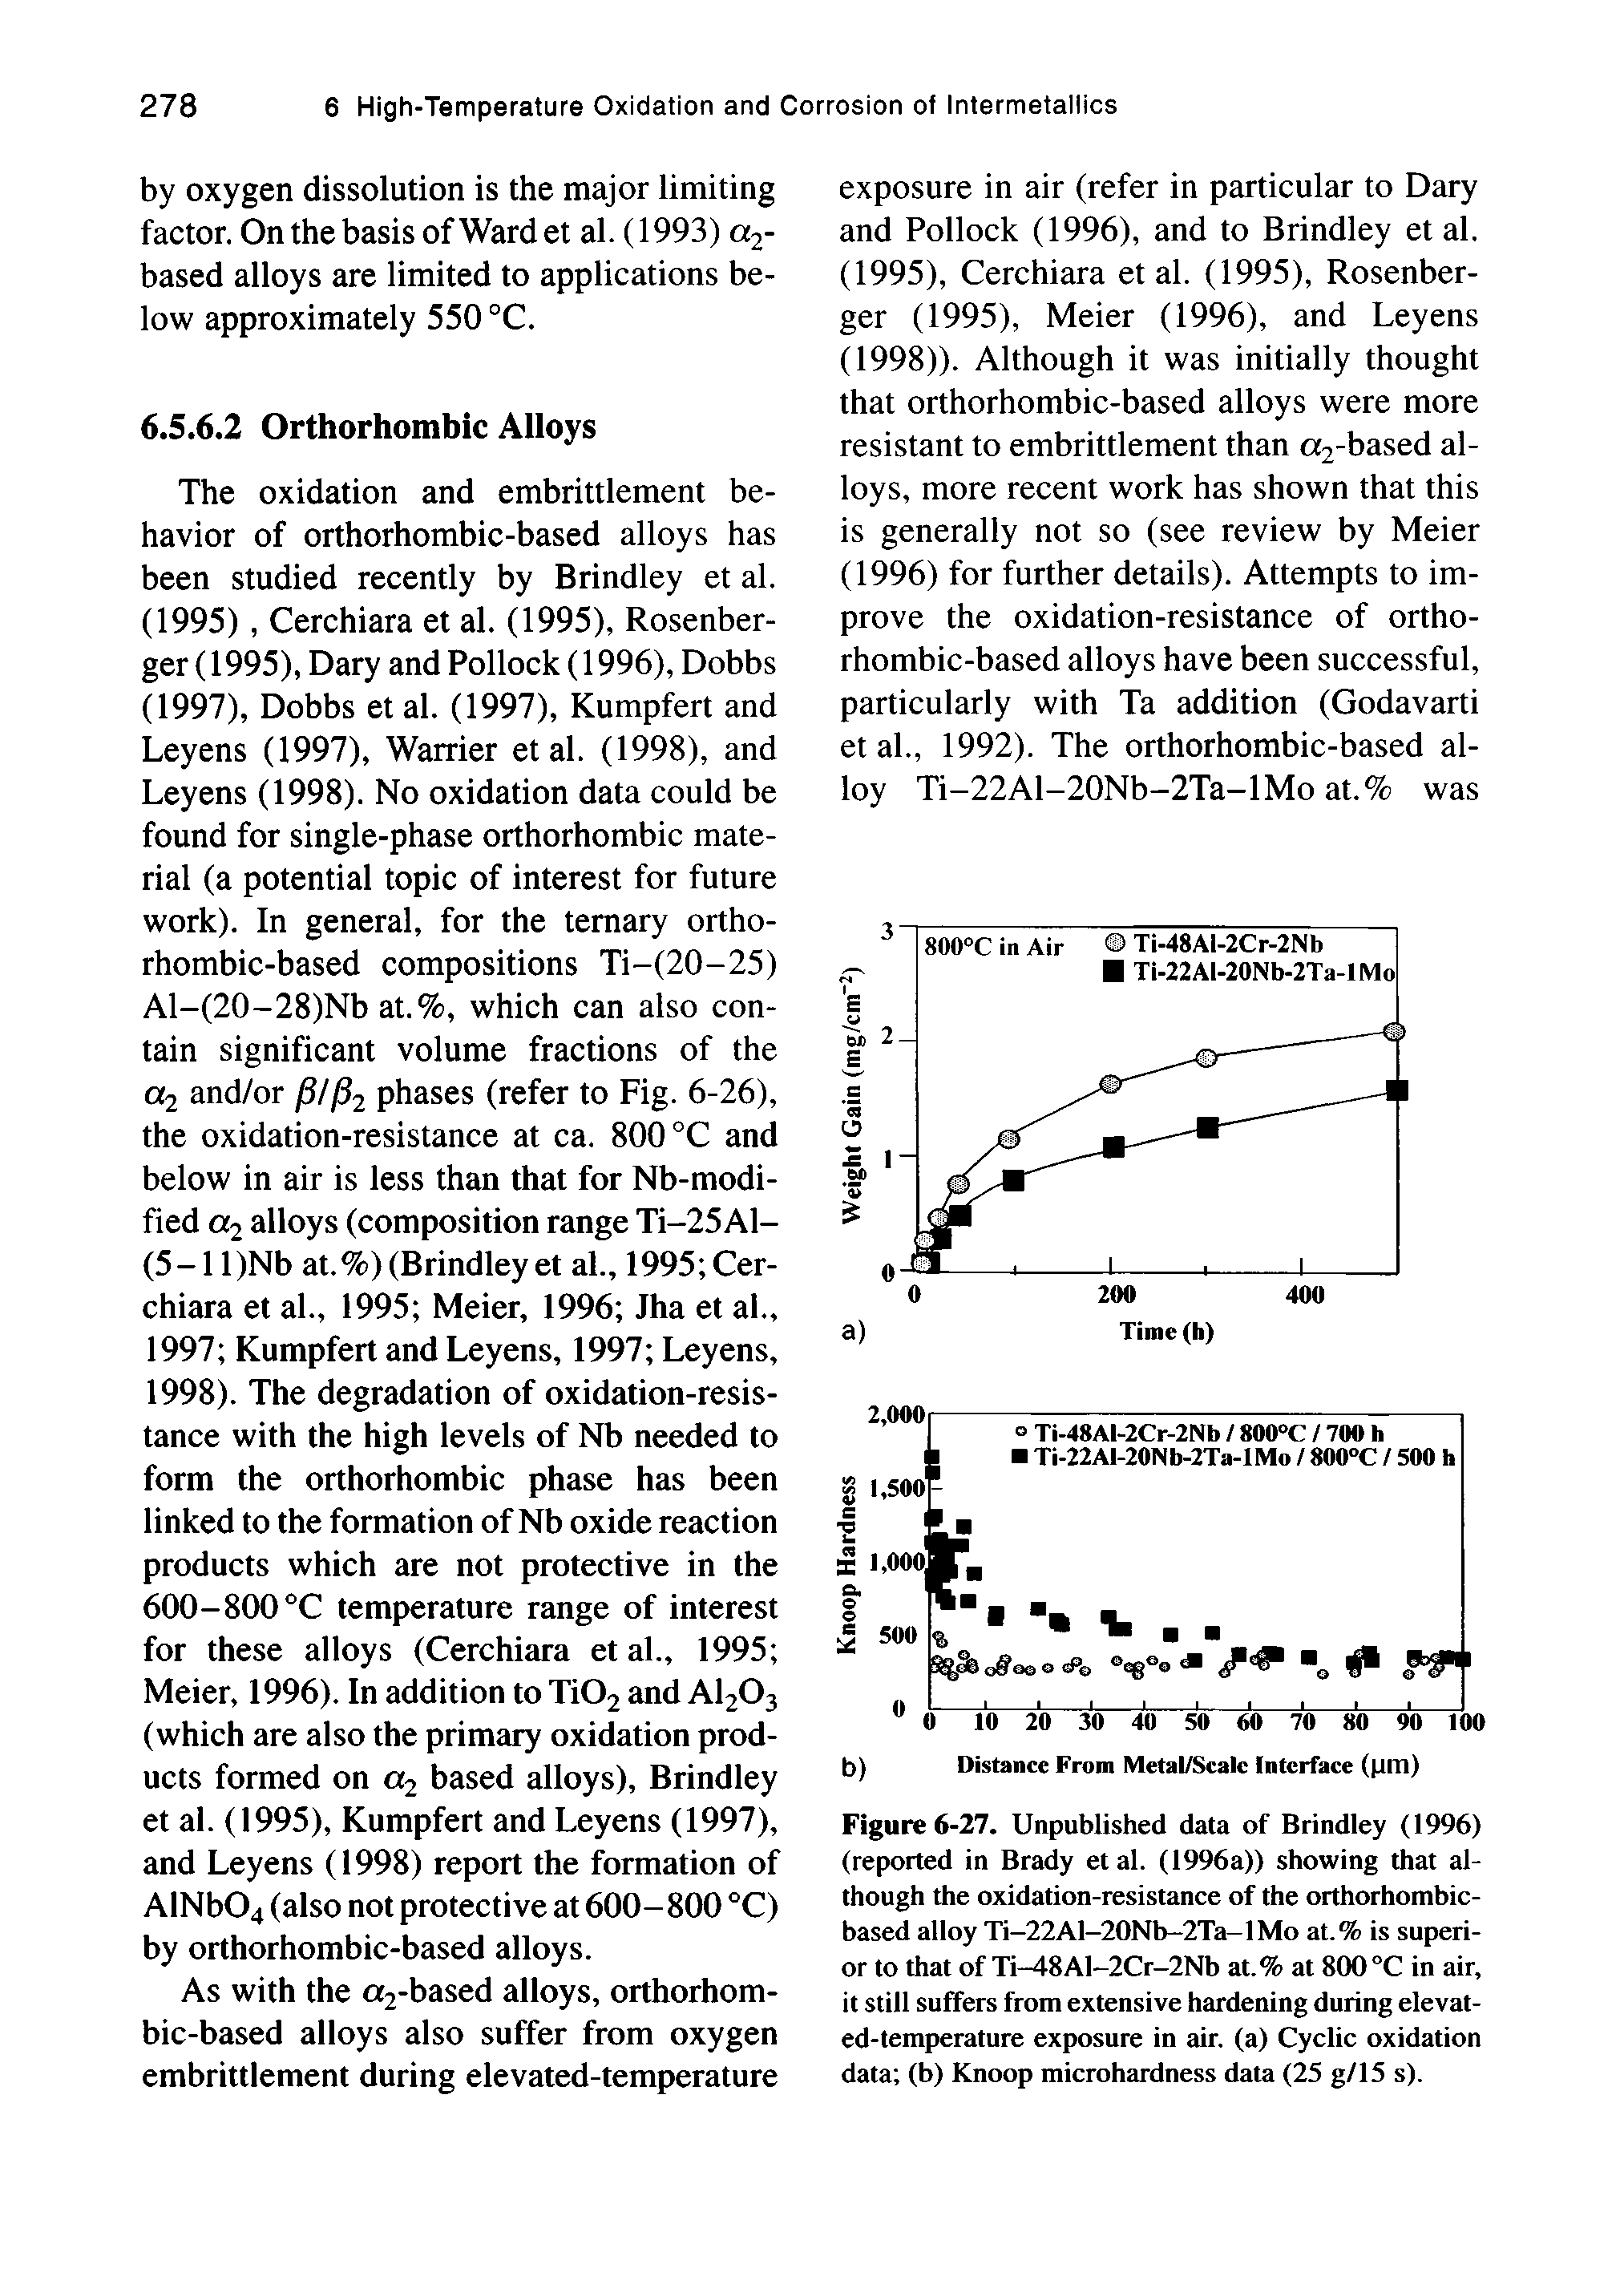 Figure 6-27. Unpublished data of Brindley (1996) (reported in Brady et al. (1996a)) showing that although the oxidation-resistance of the orthorhombic-based alloy Ti-22Al-20Nb-2Ta-lMo at.% is superior to that of Ti-48Al-2Cr-2Nb at.% at 800°C in air, it still suffers from extensive hardening during elevated-temperature exposure in air. (a) Cyclic oxidation data (b) Knoop microhardness data (25 g/15 s).